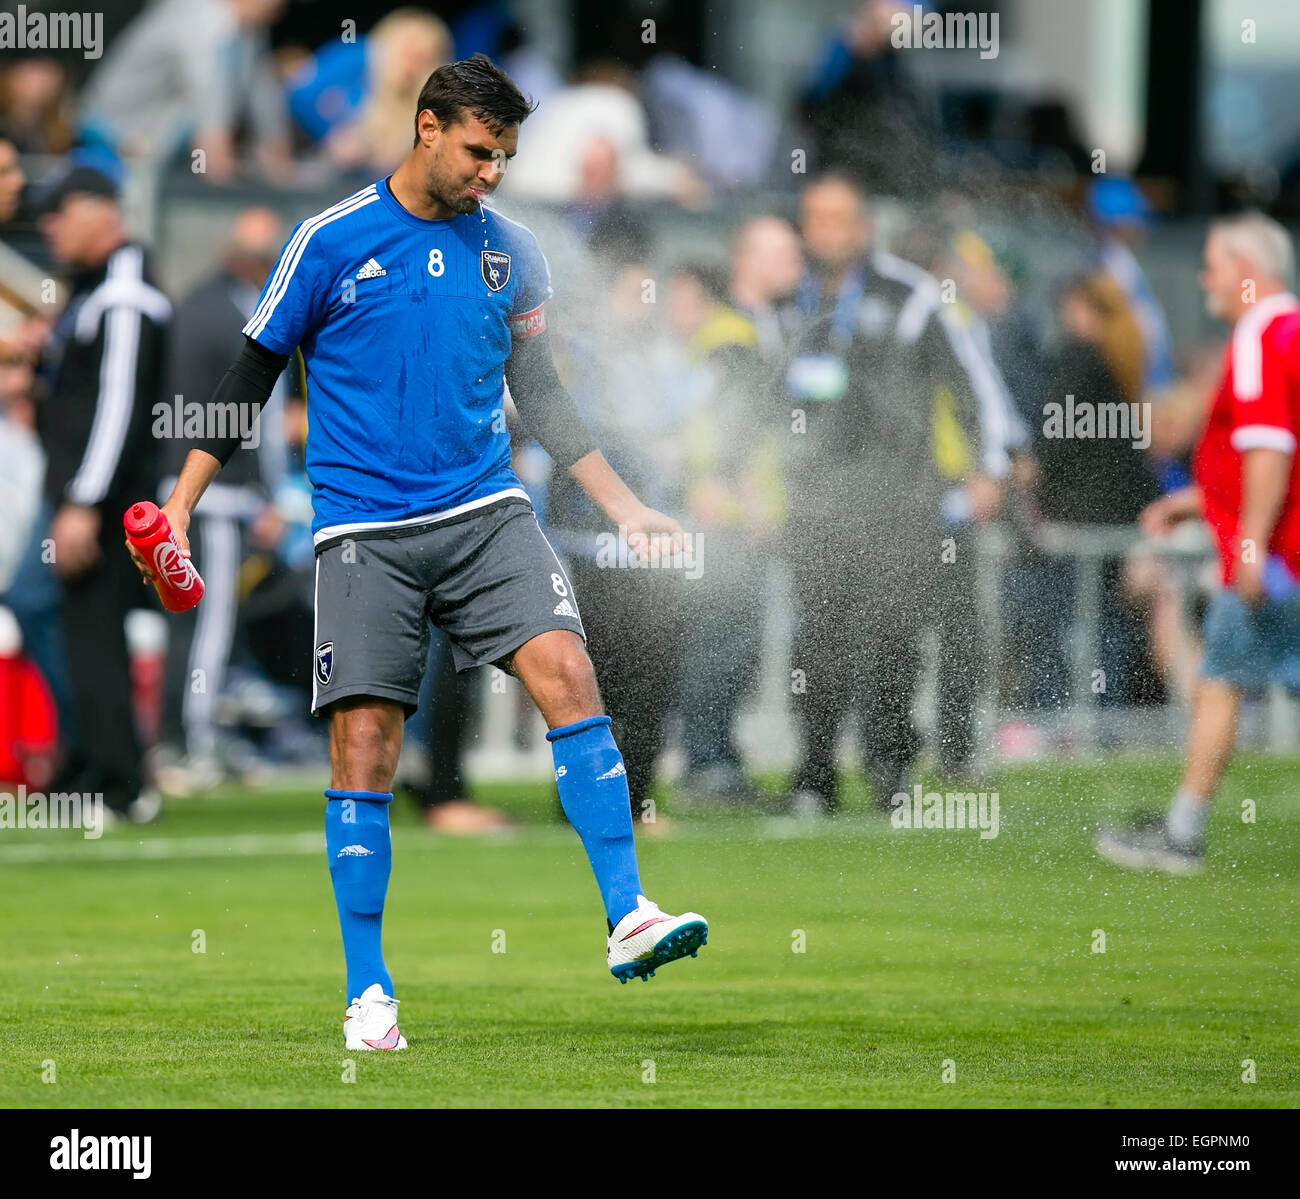 The Second Half. 18th Aug, 2013. San Jose Earthquakes forward Chris Wondolowski (8) spits water prior to the MLS soccer game between the San Jose Earthquakes and Los Angeles Galaxy at Avaya Stadium in San Jose, CA. The Earthquakes lead LA 2-1 in the second half. Damon Tarver/Cal Sport Media/Alamy Live News Stock Photo